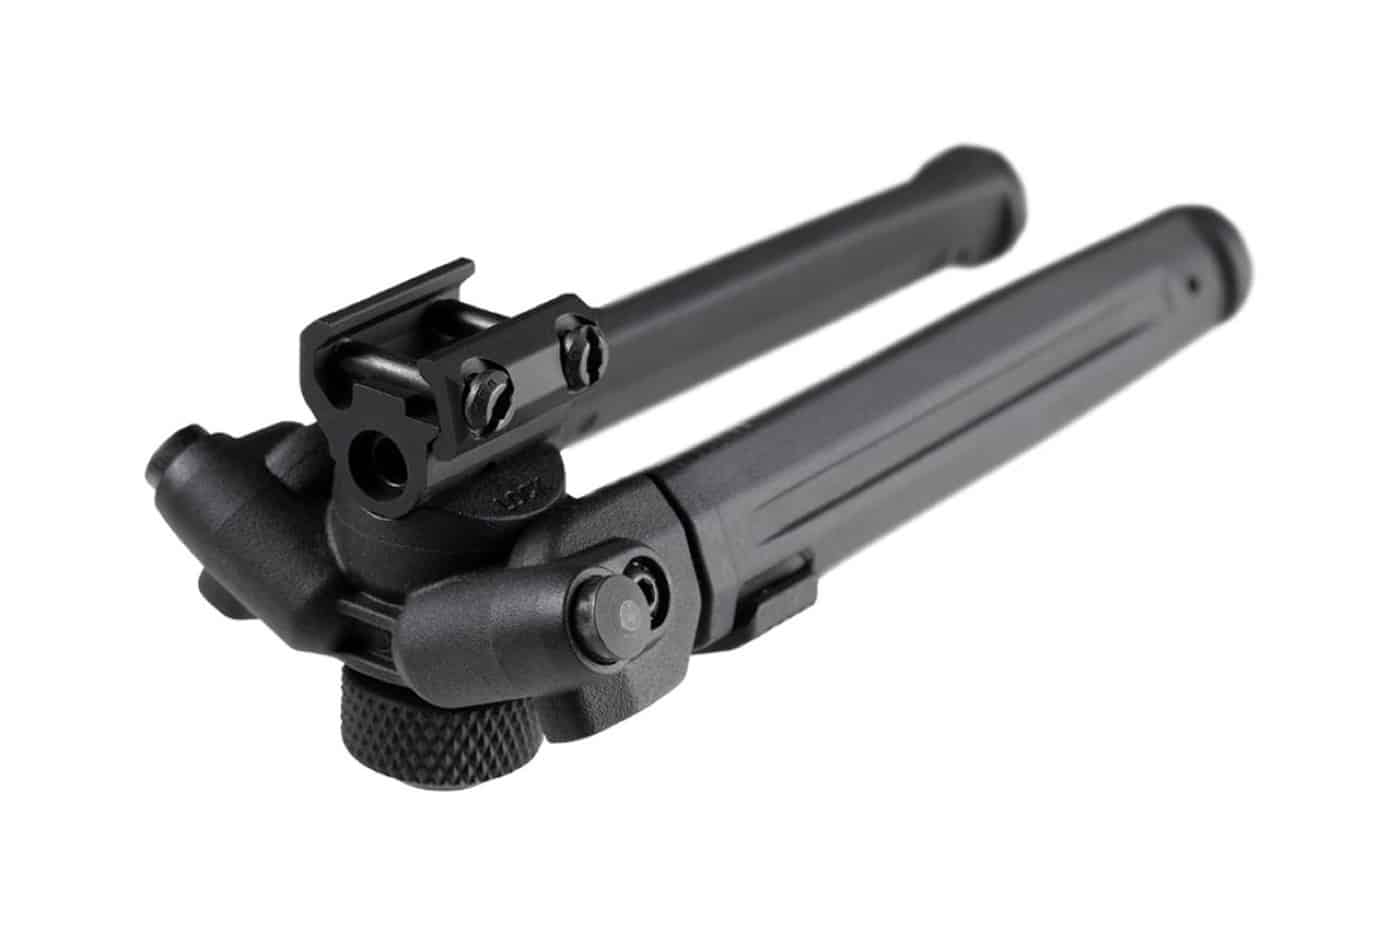 In this photograph, we see the Magpul bipod unattached to the gun. It shows how compact the bipod can be when folded.